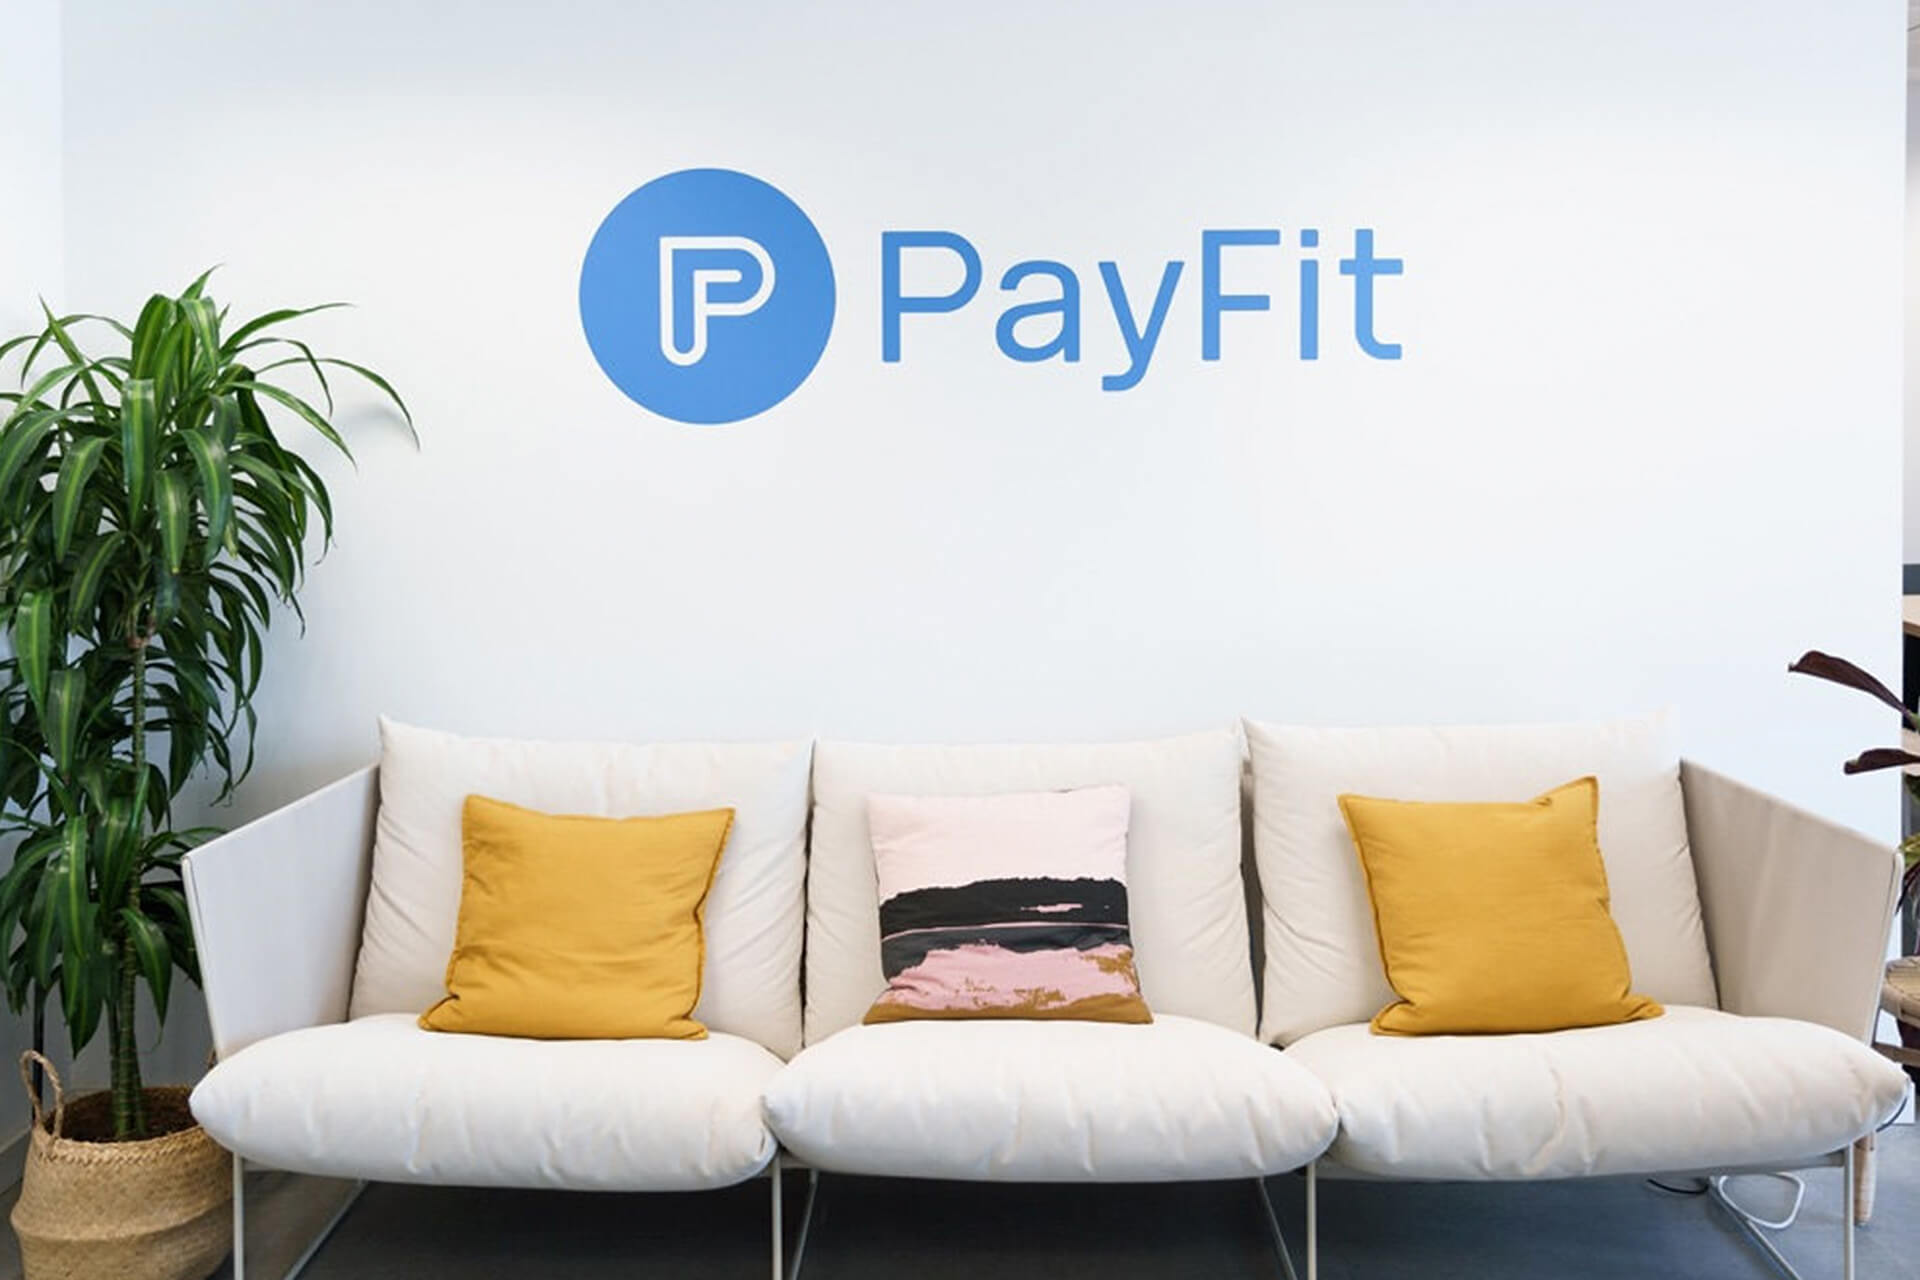 Club PayFit is our new partner